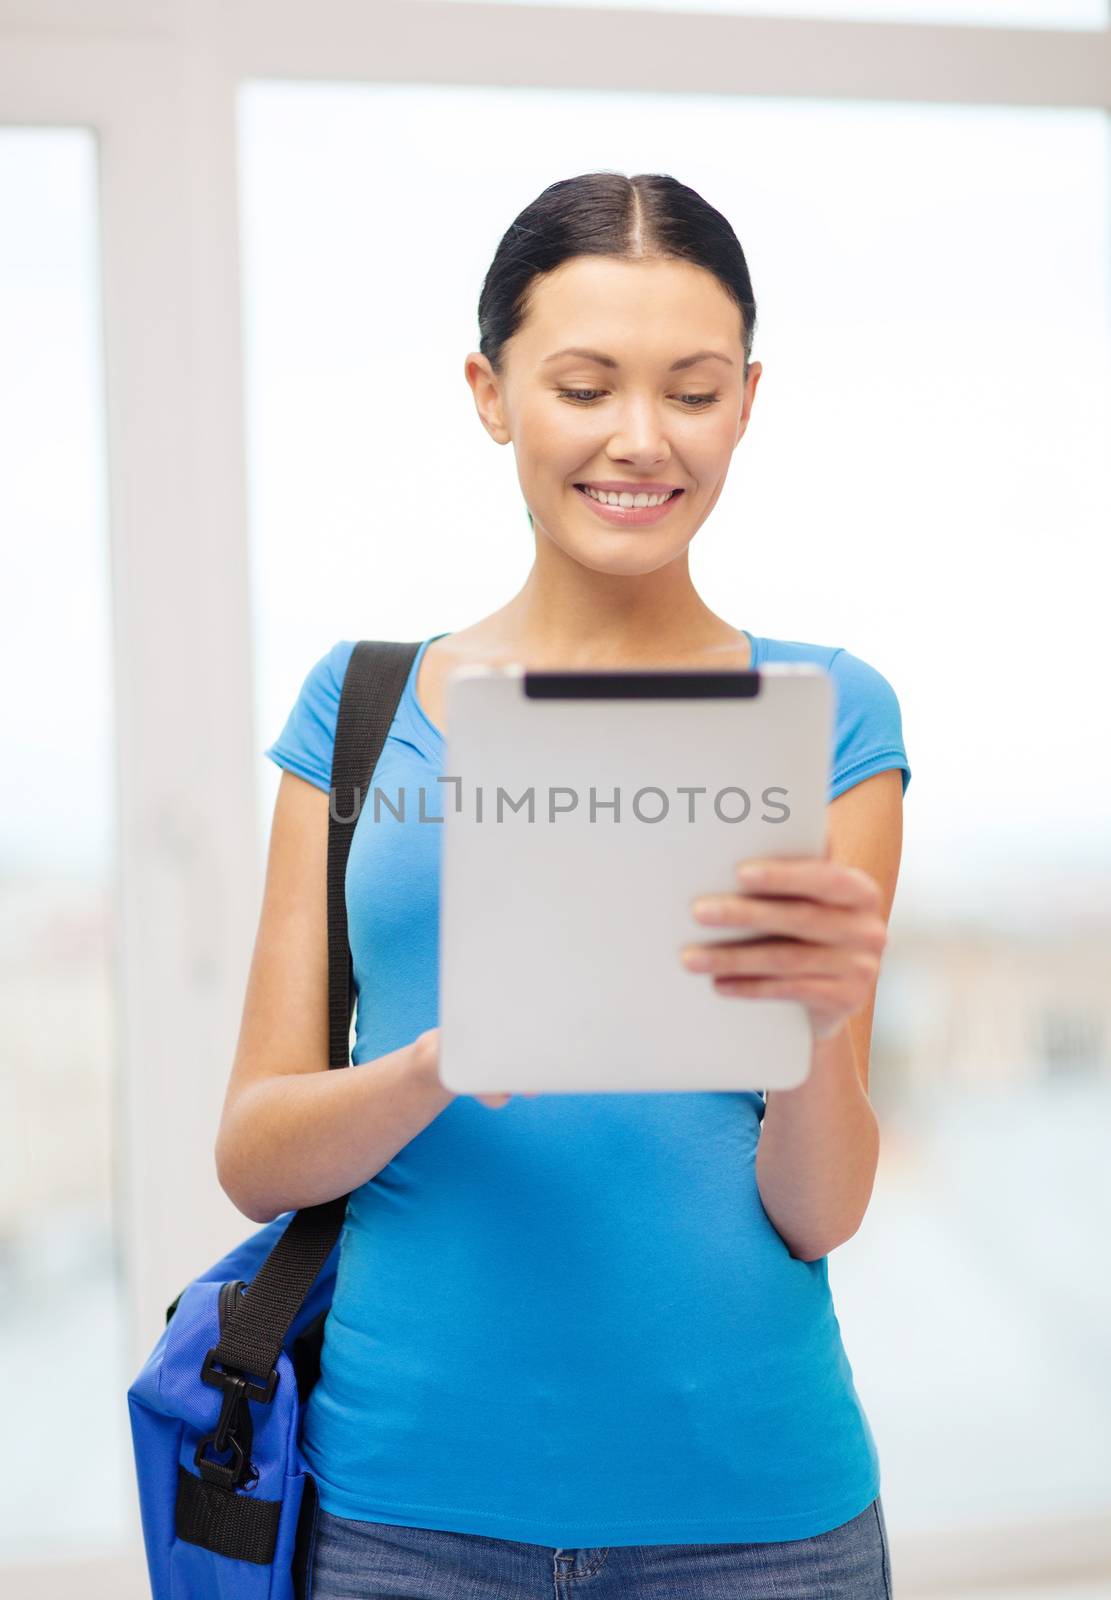 education, technology, communication and school concept - smiling female student with tablet pc and bag at school